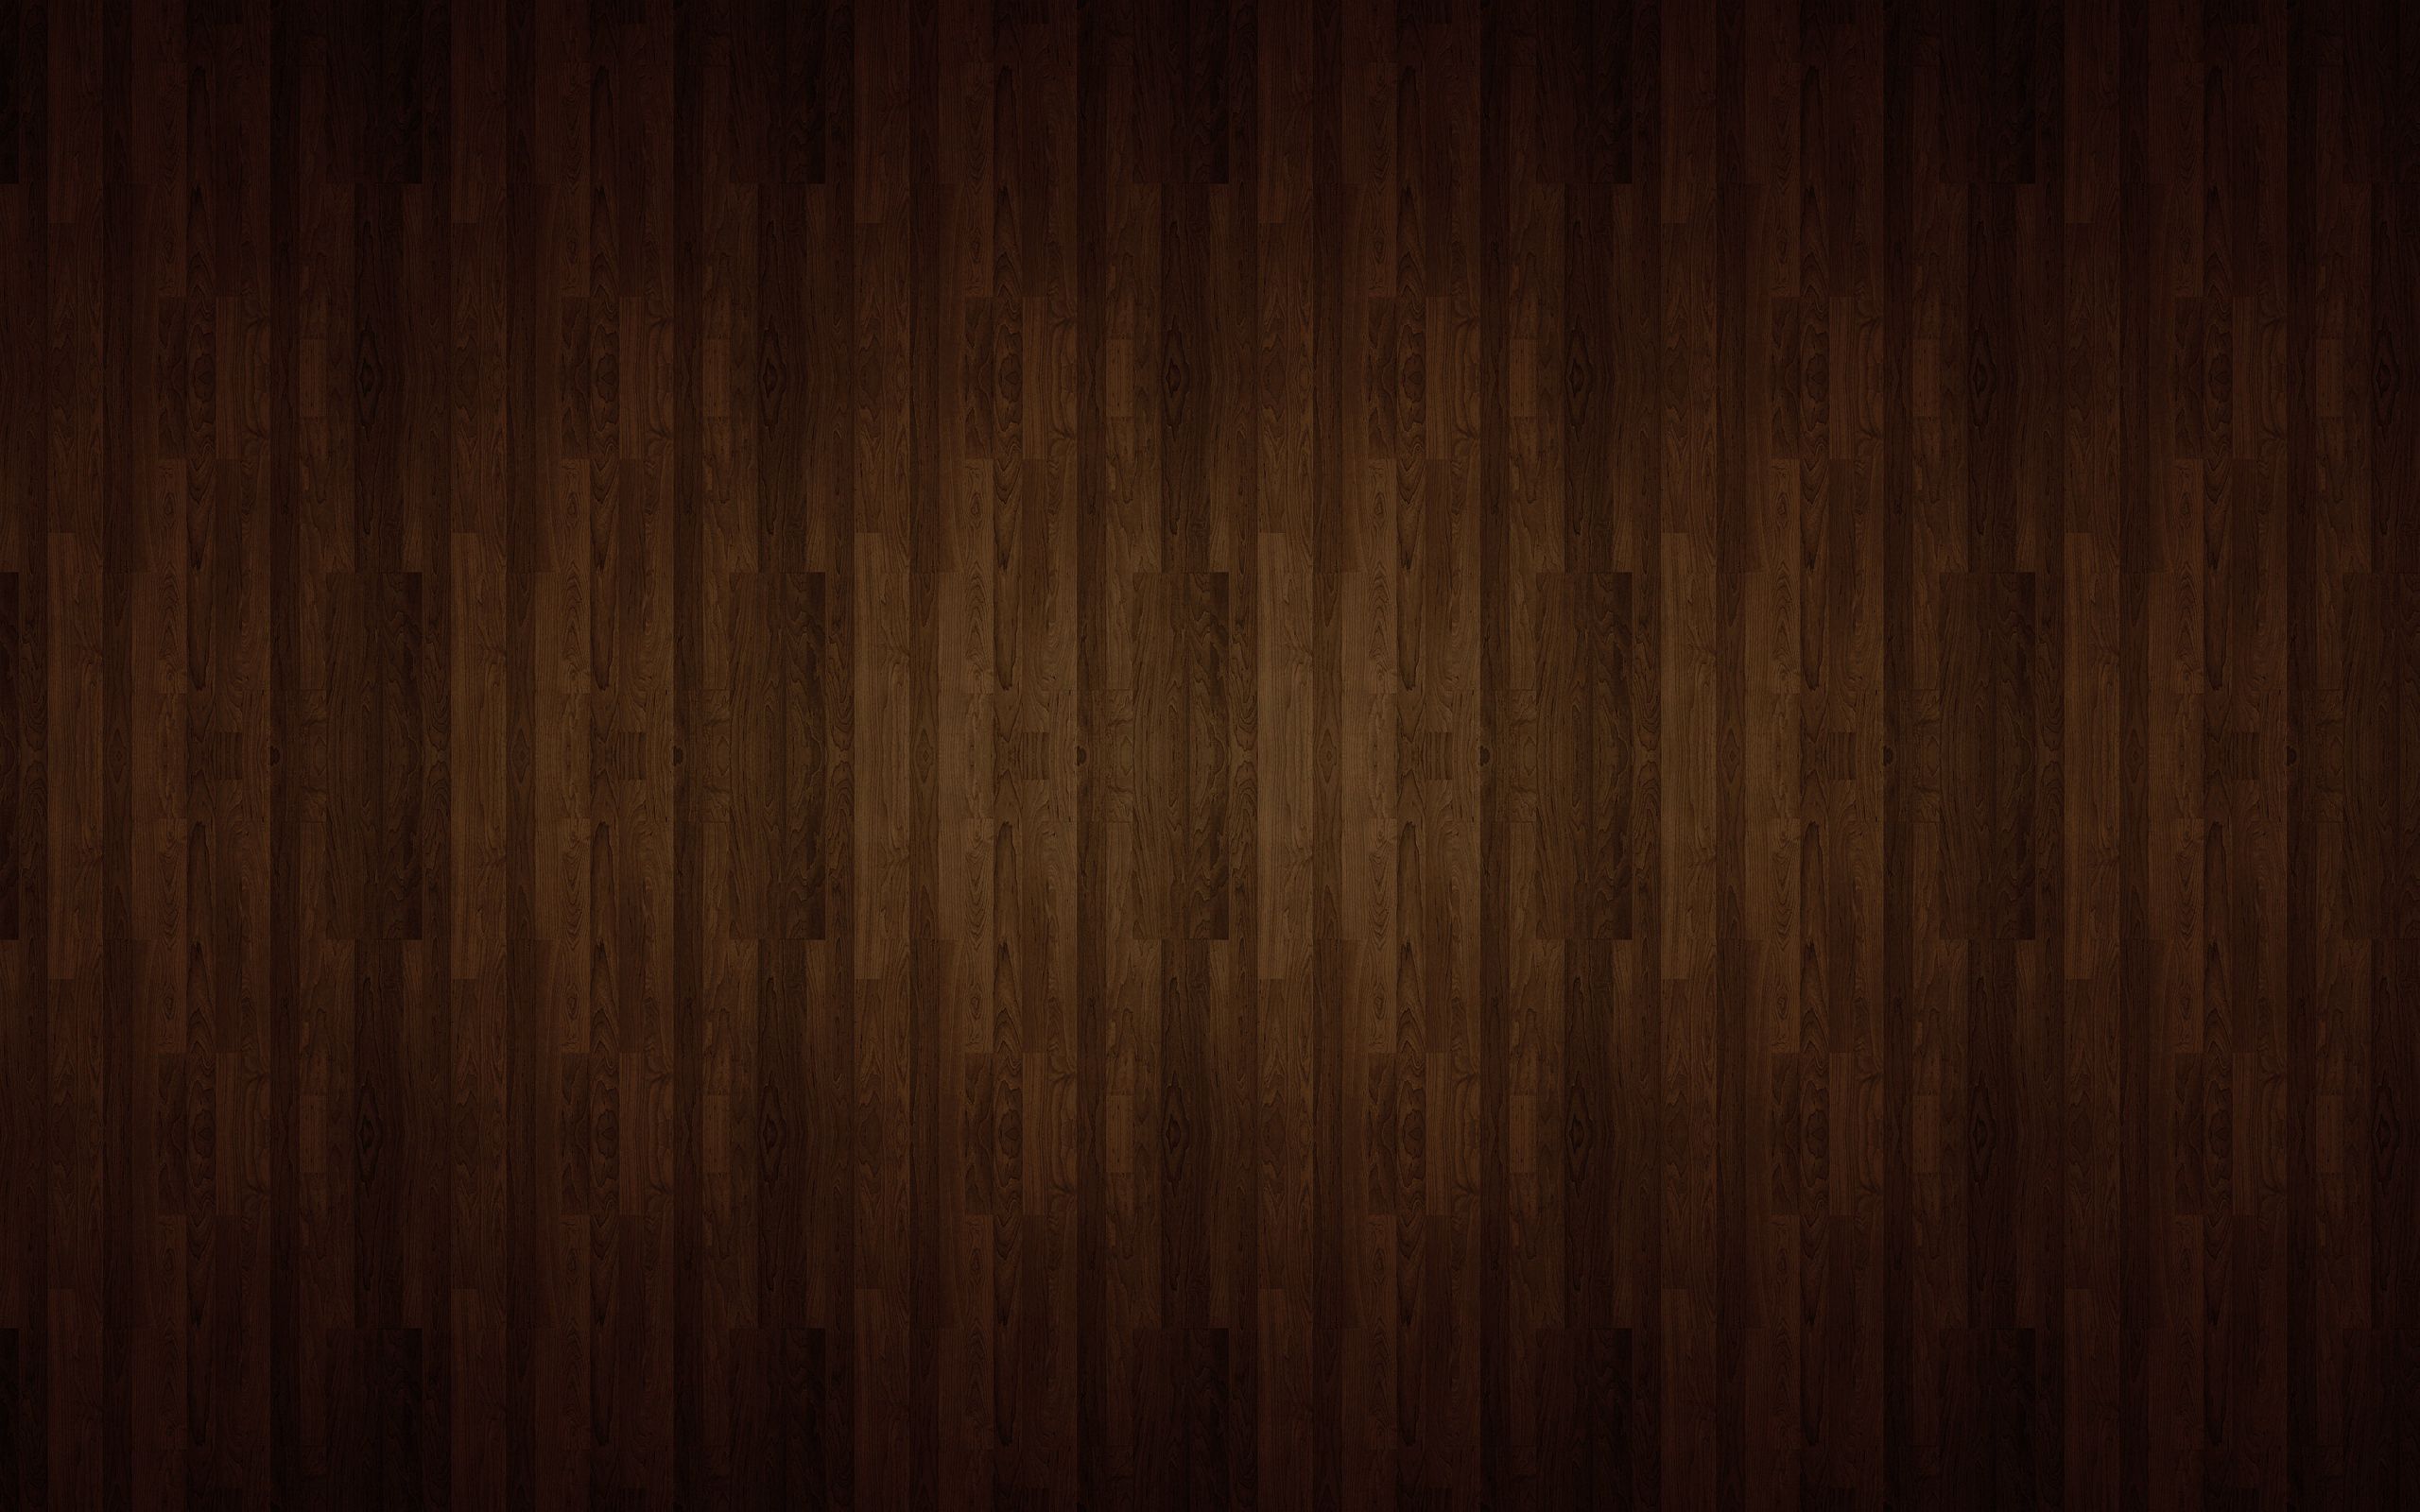 surface, planks, textures, wood, tree, texture, board, parquet